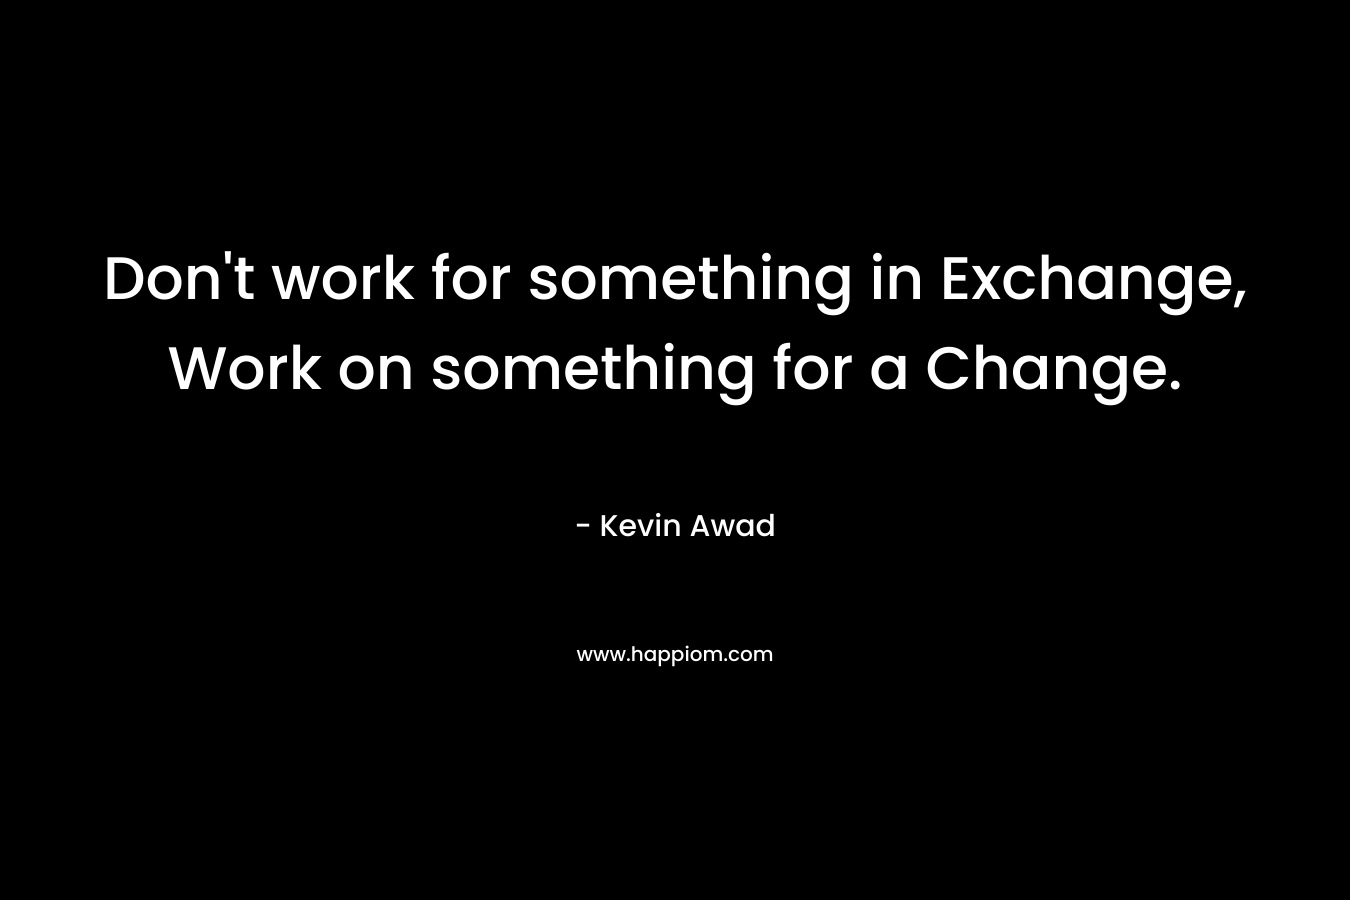 Don't work for something in Exchange, Work on something for a Change.